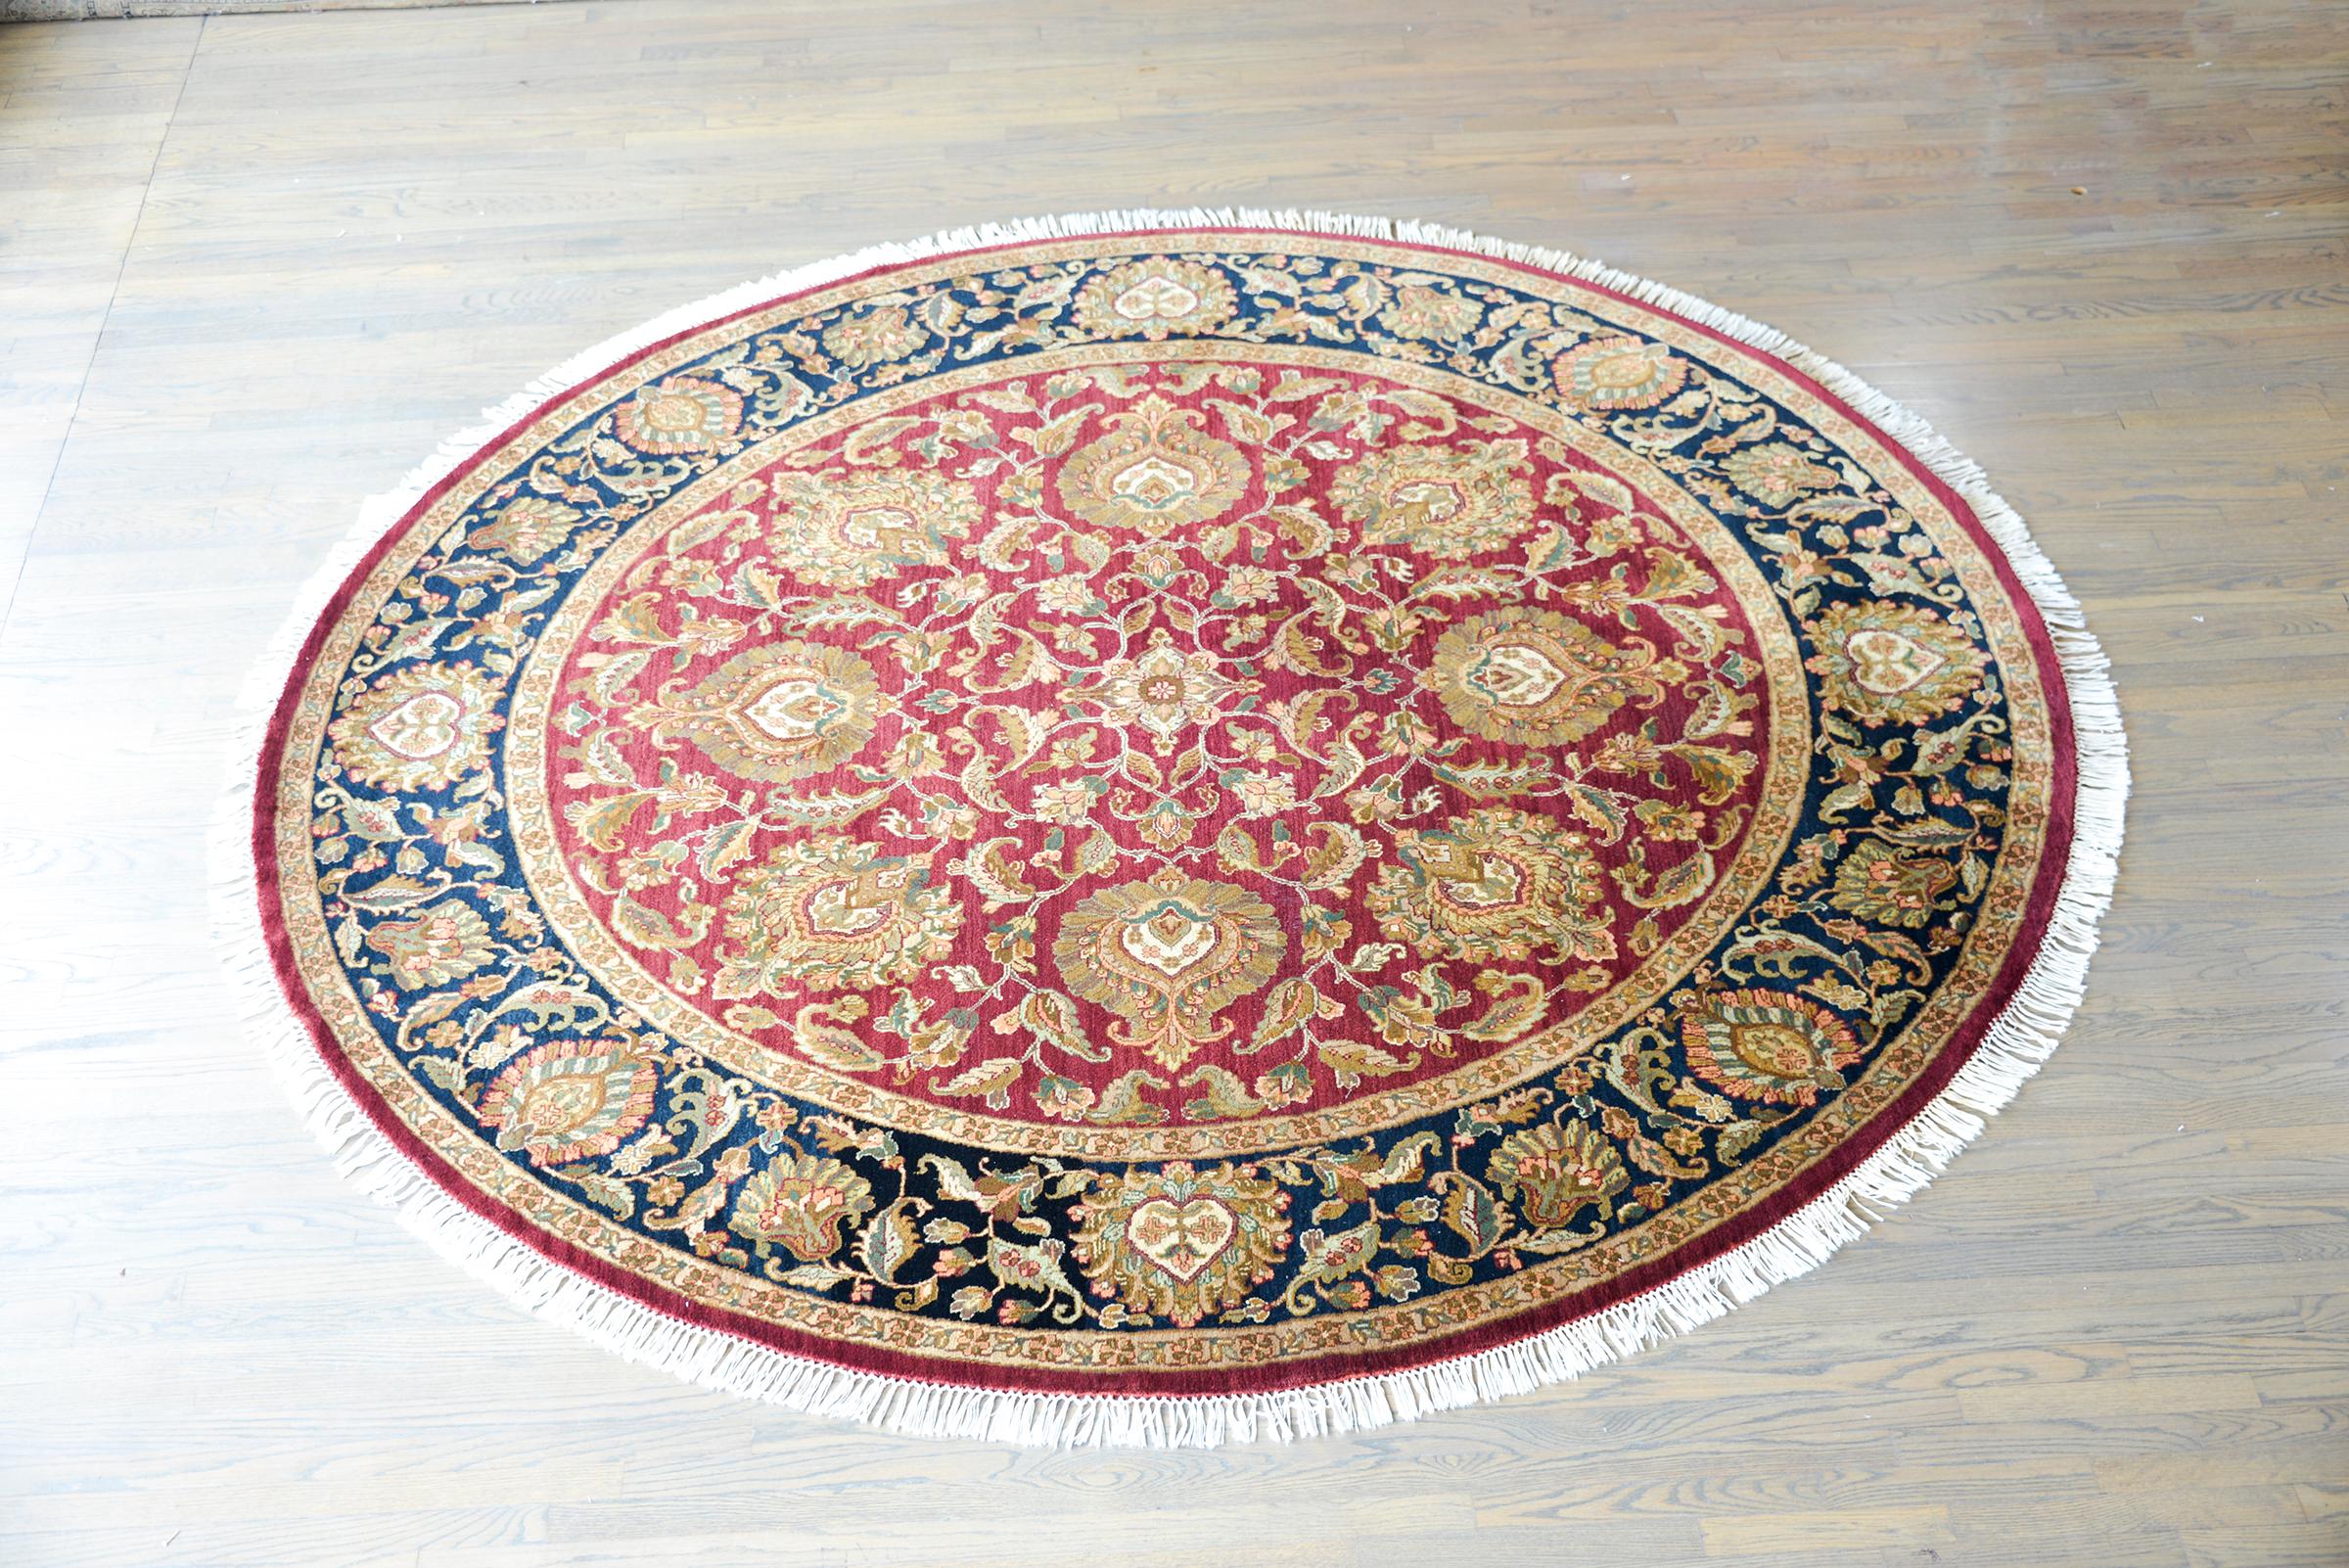 A beautiful vintage Indian Tabriz-style round rug with a mirrored pattern in the center with several stylized flowers and scrolling vines, woven in gold, cream, orange, and white, against a cranberry background. The border is similarly patterned